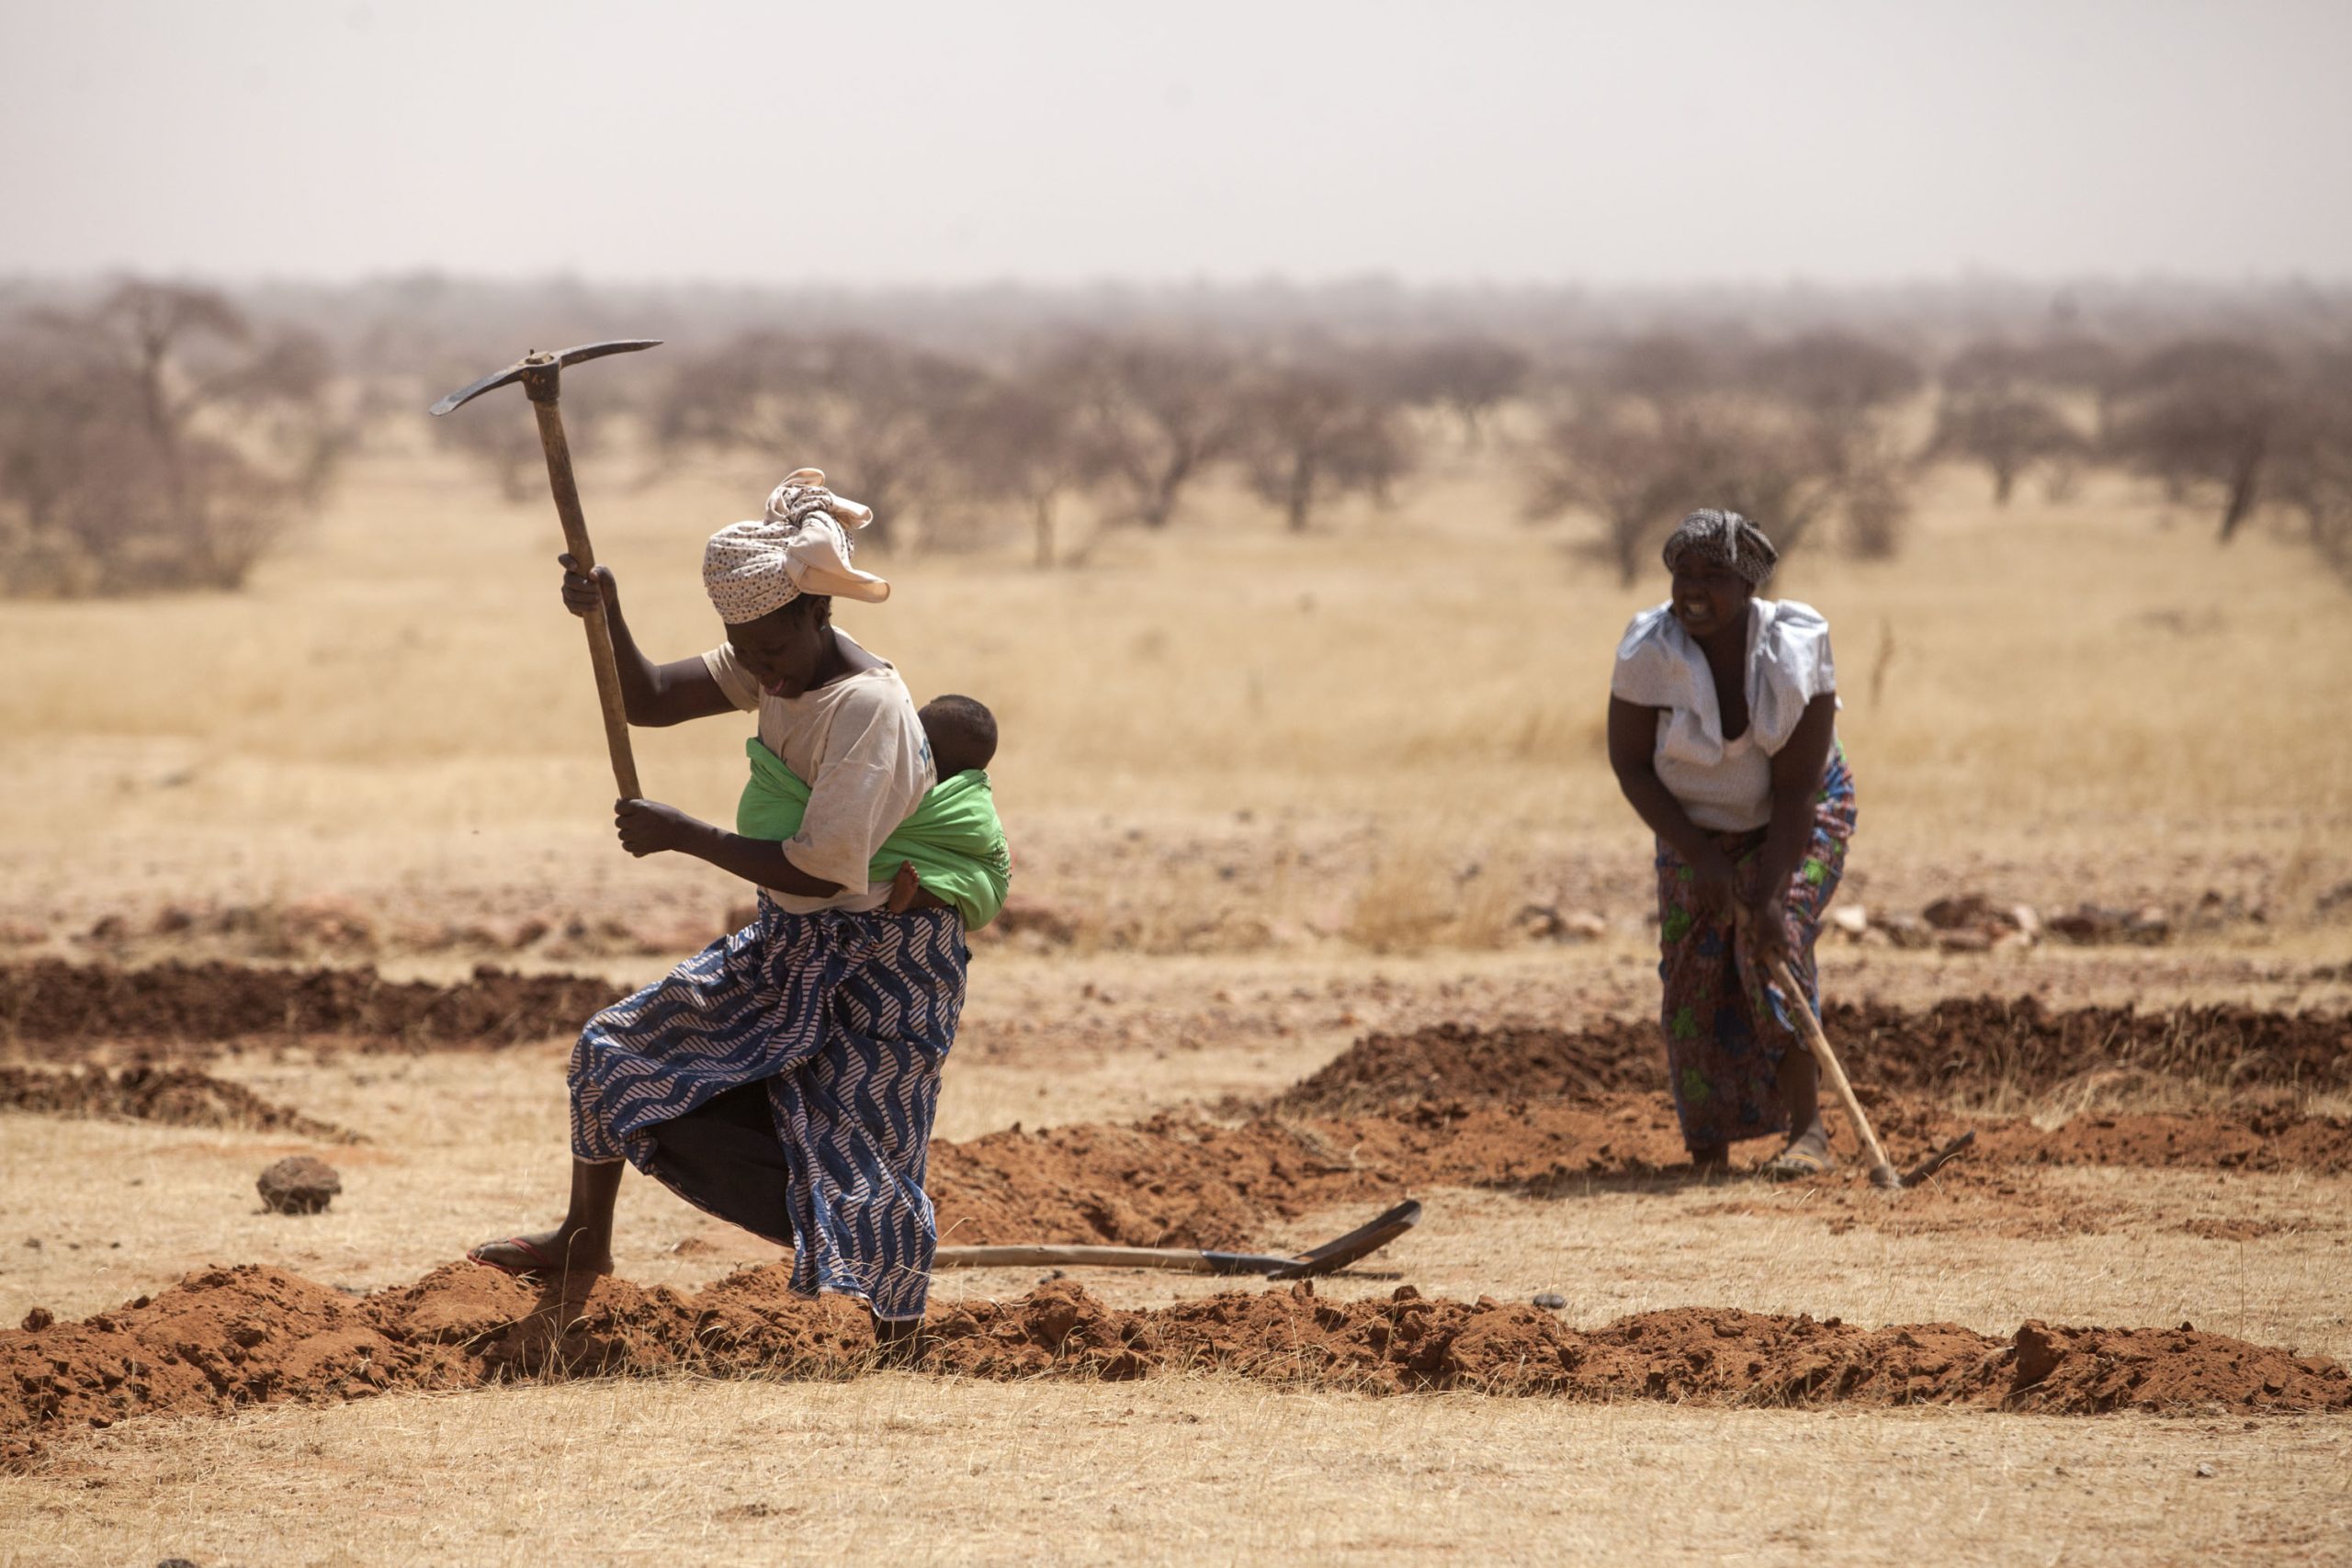 02 March 2016, Tera, Bajirga, Niger - Women at work for preparing the field for the next rainy season by escaving mid-moon dams to save water. FAO project GCP/INT/157/EC: Action Against Deserti­fication is an initiative of the African, Caribbean and Pacifi­c Group of States (ACP) to promote sustainable land management and restore drylands and degraded lands in Africa, the Caribbean and the Pacifi­c, implemented by FAO and partners with funding from the European Union in the framework of the 10th European Development Fund (EDF).